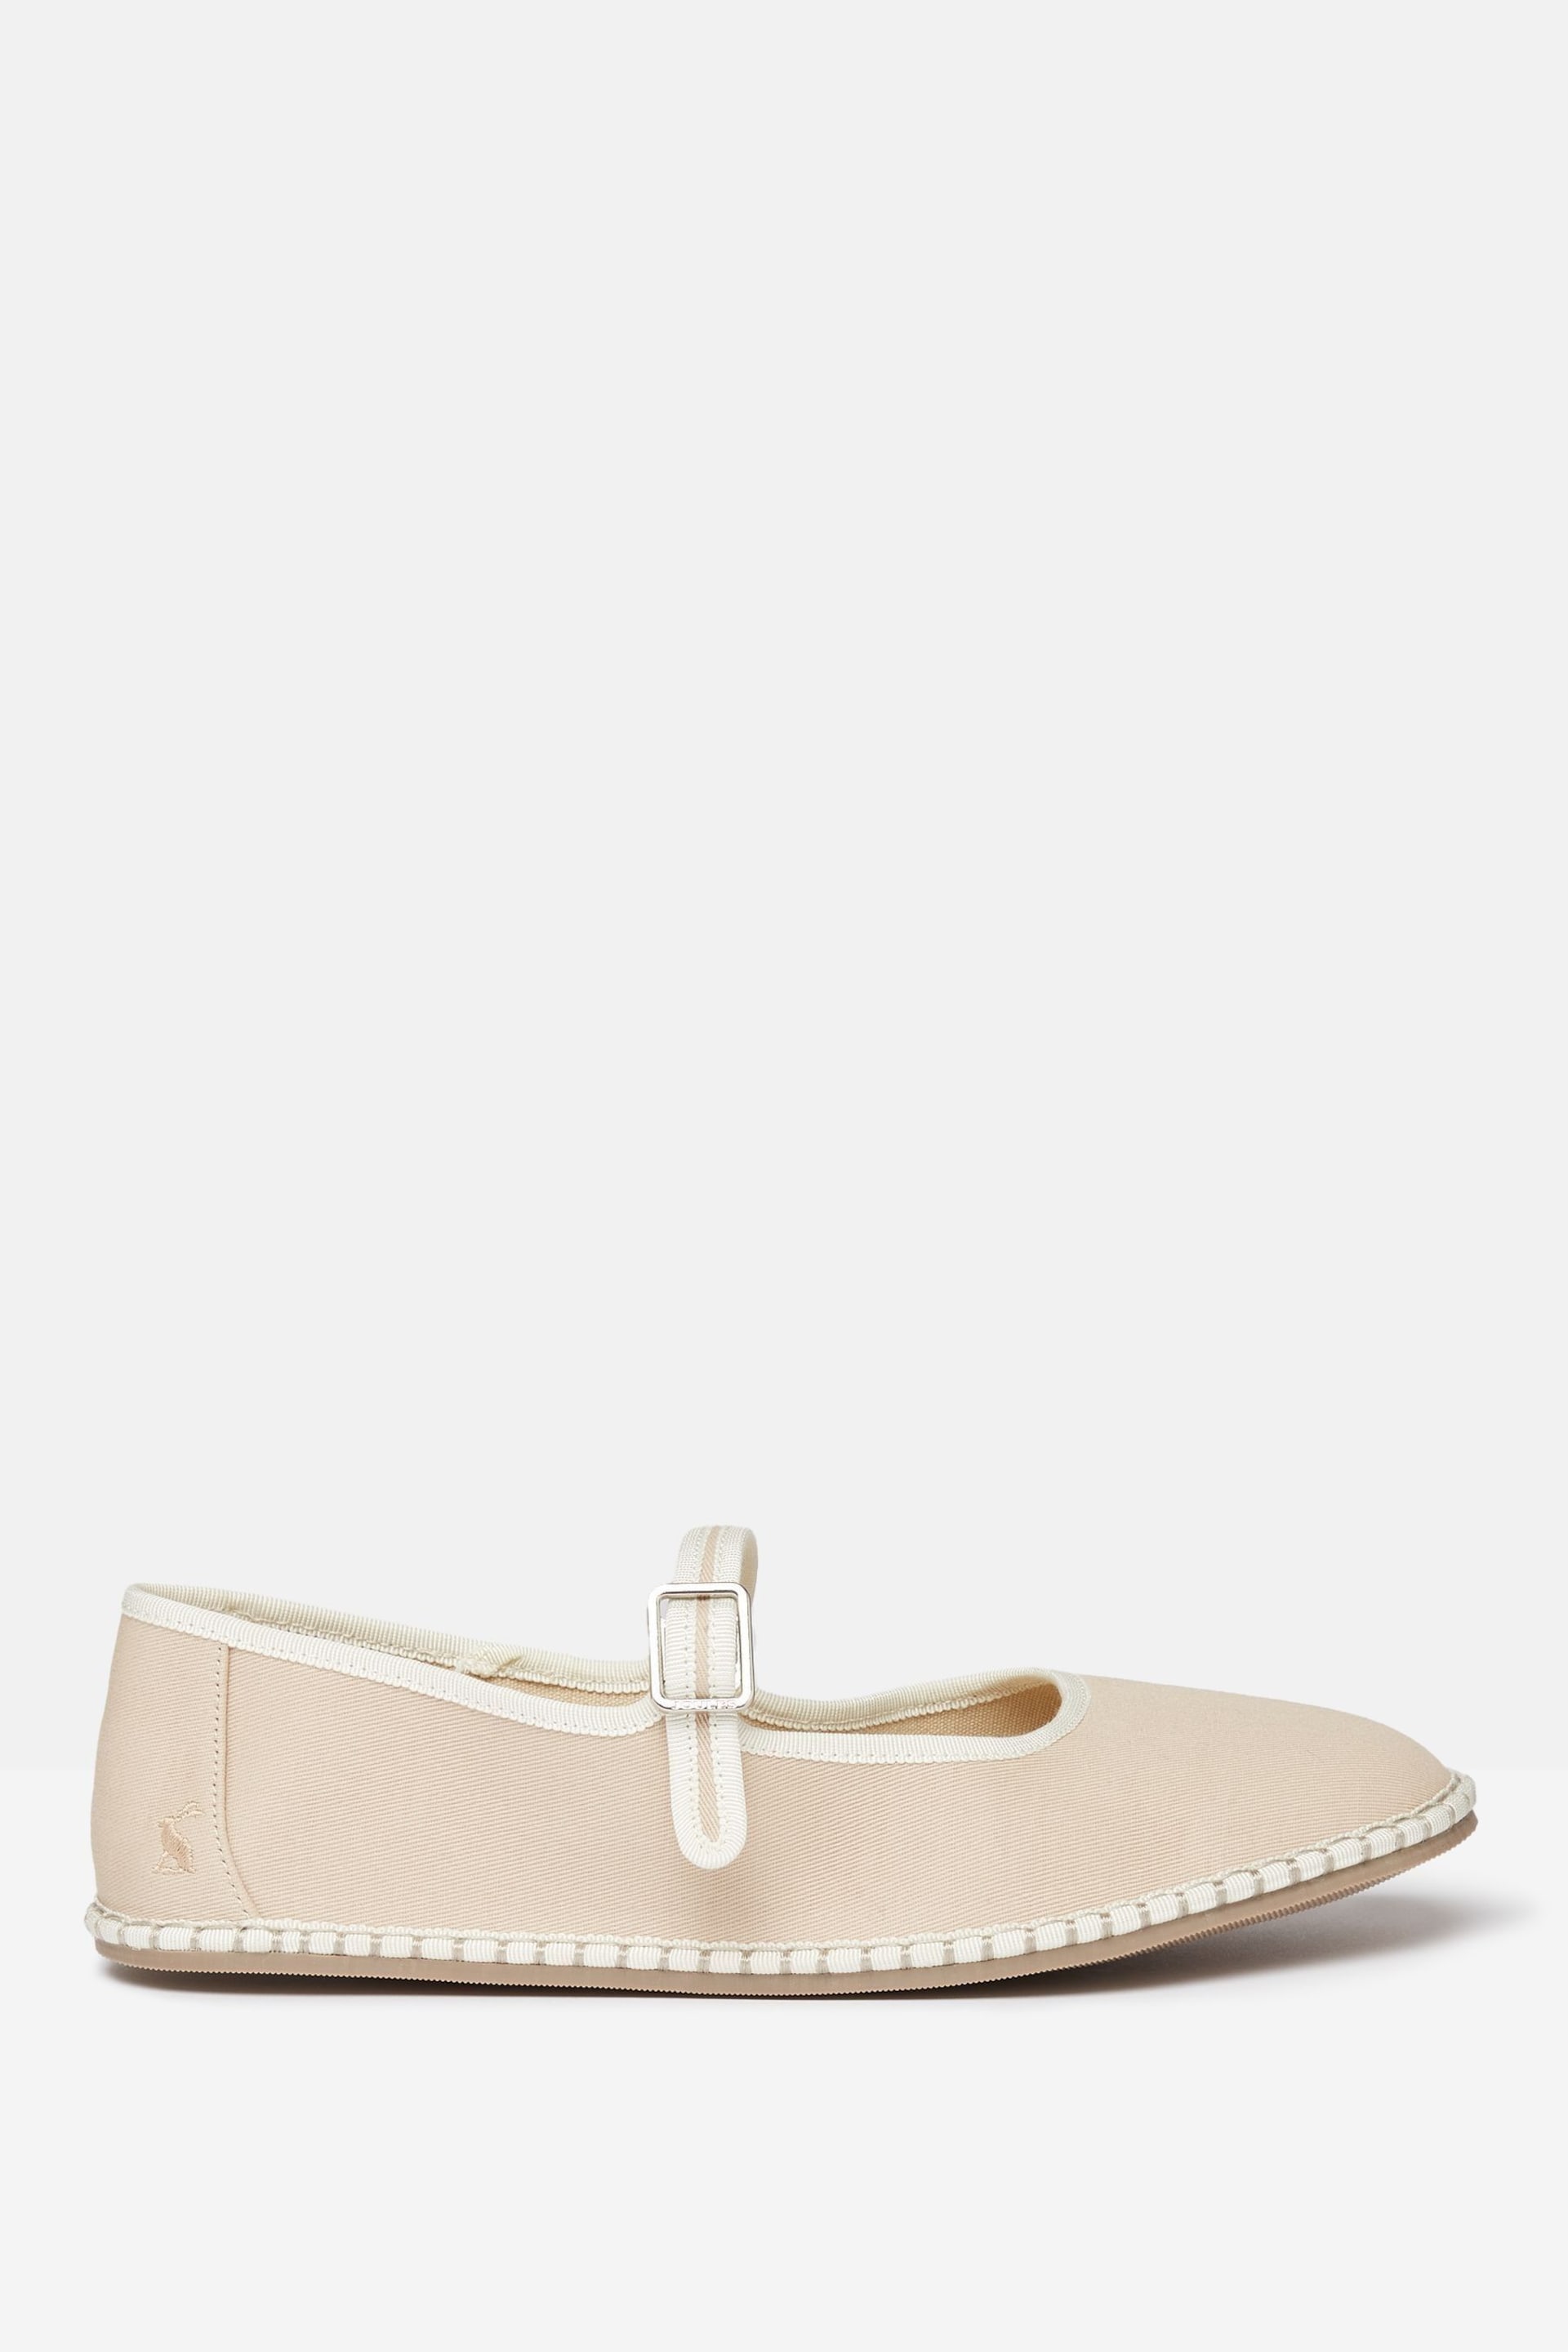 Joules Maddison Neutral Canvas Mary Jane Shoes - Image 1 of 6